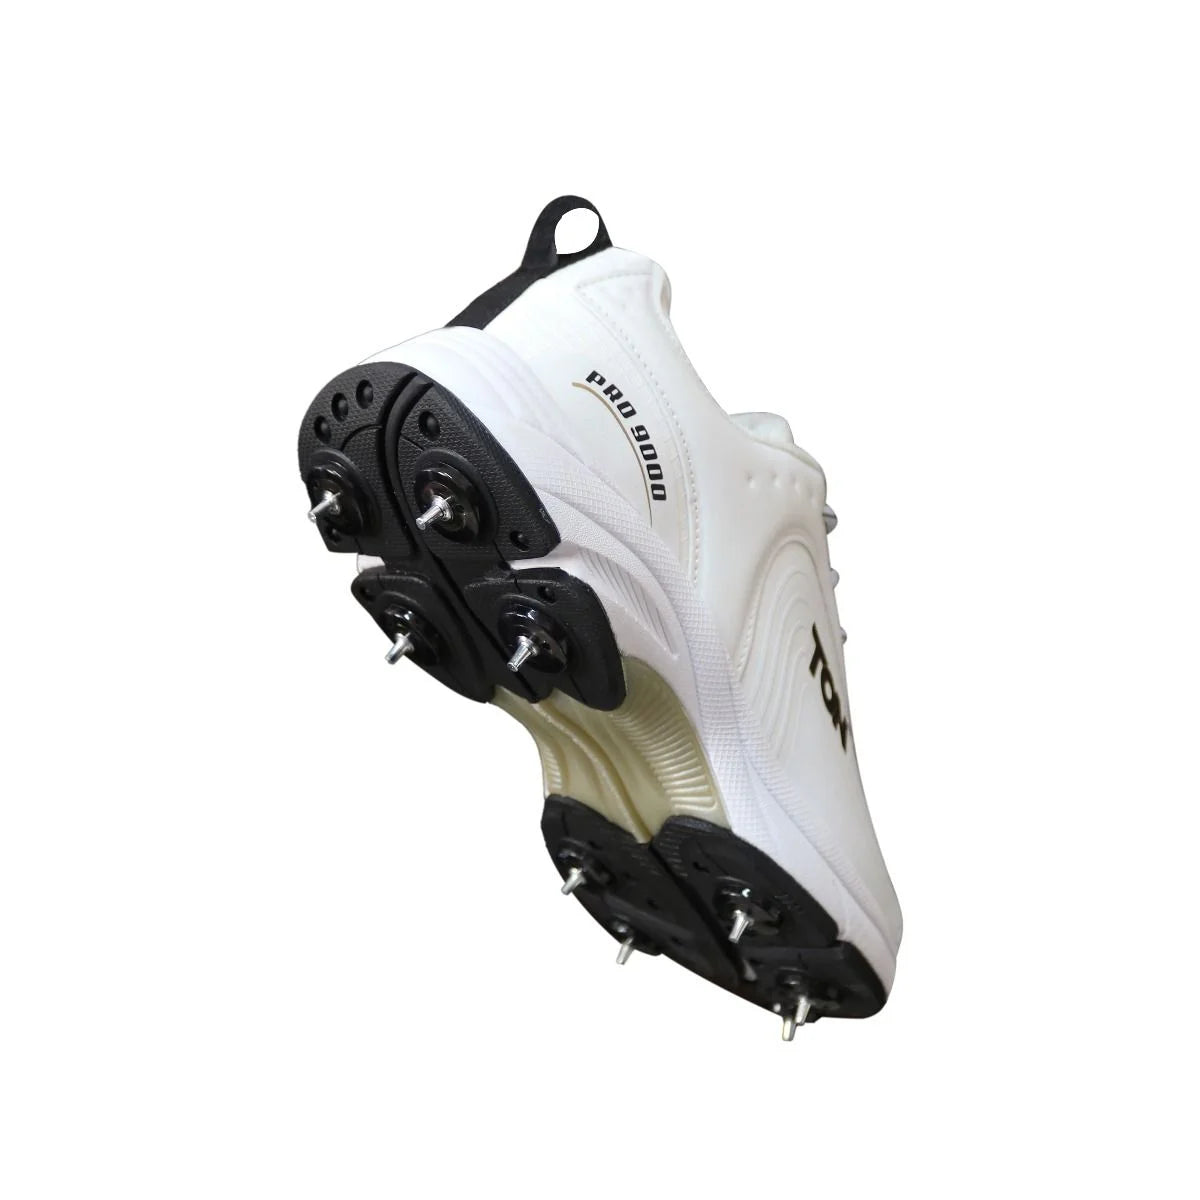 SS Ton Pro 9000 Cricket Spike Shoes - White and Black